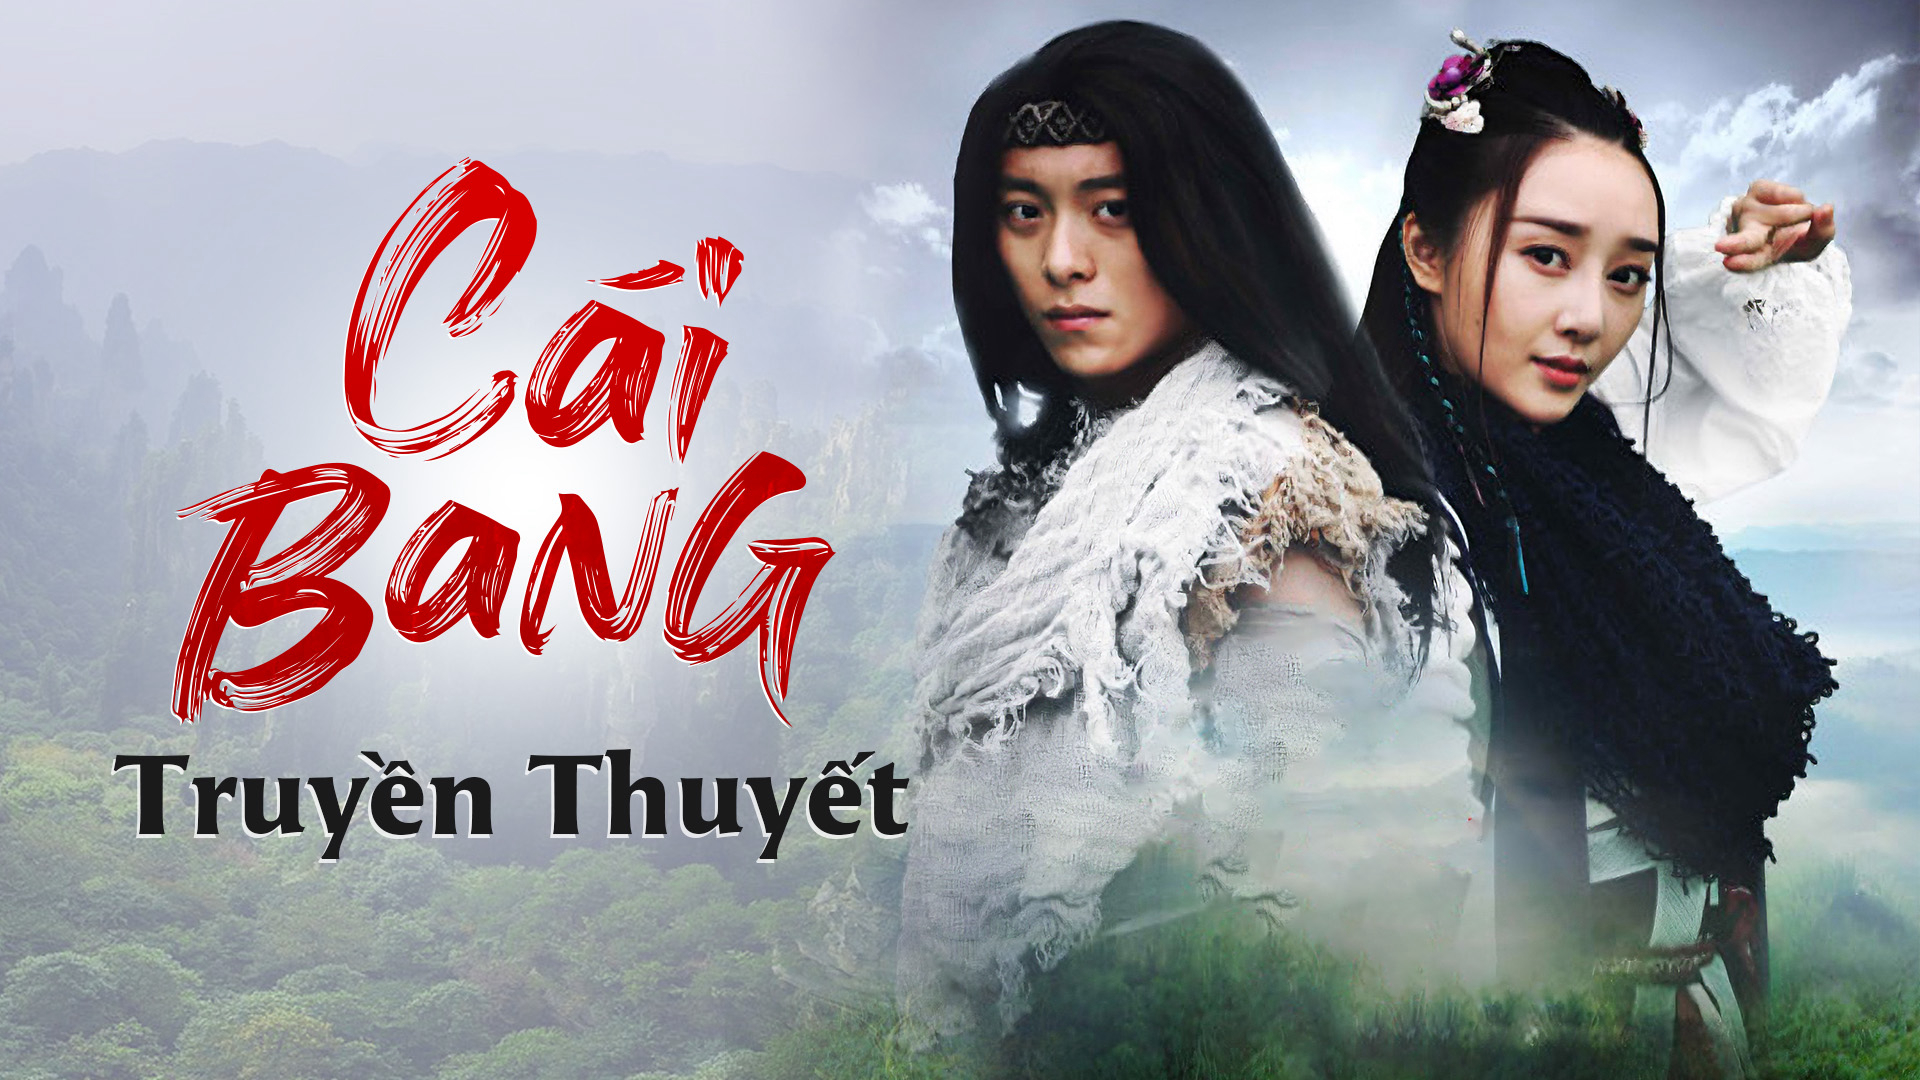 Poster Phim Cái Bang Truyền Thuyết (Other People’s Lives)